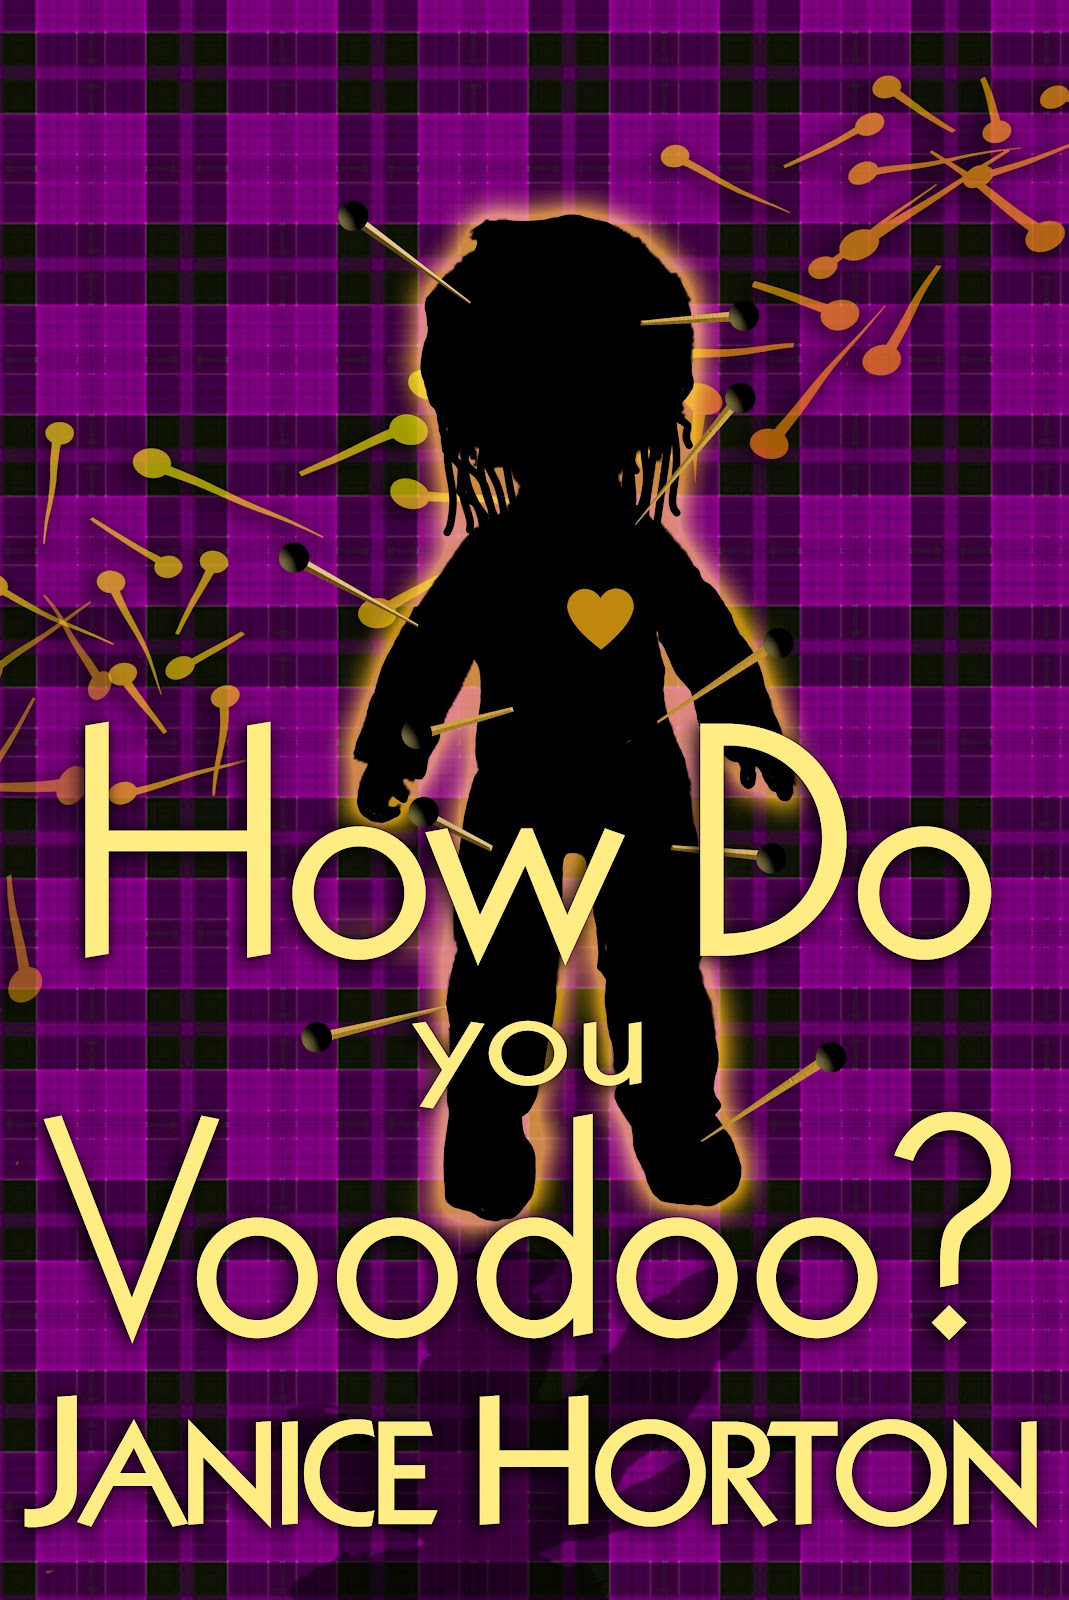 How Do You Voodoo, by Janice Horton